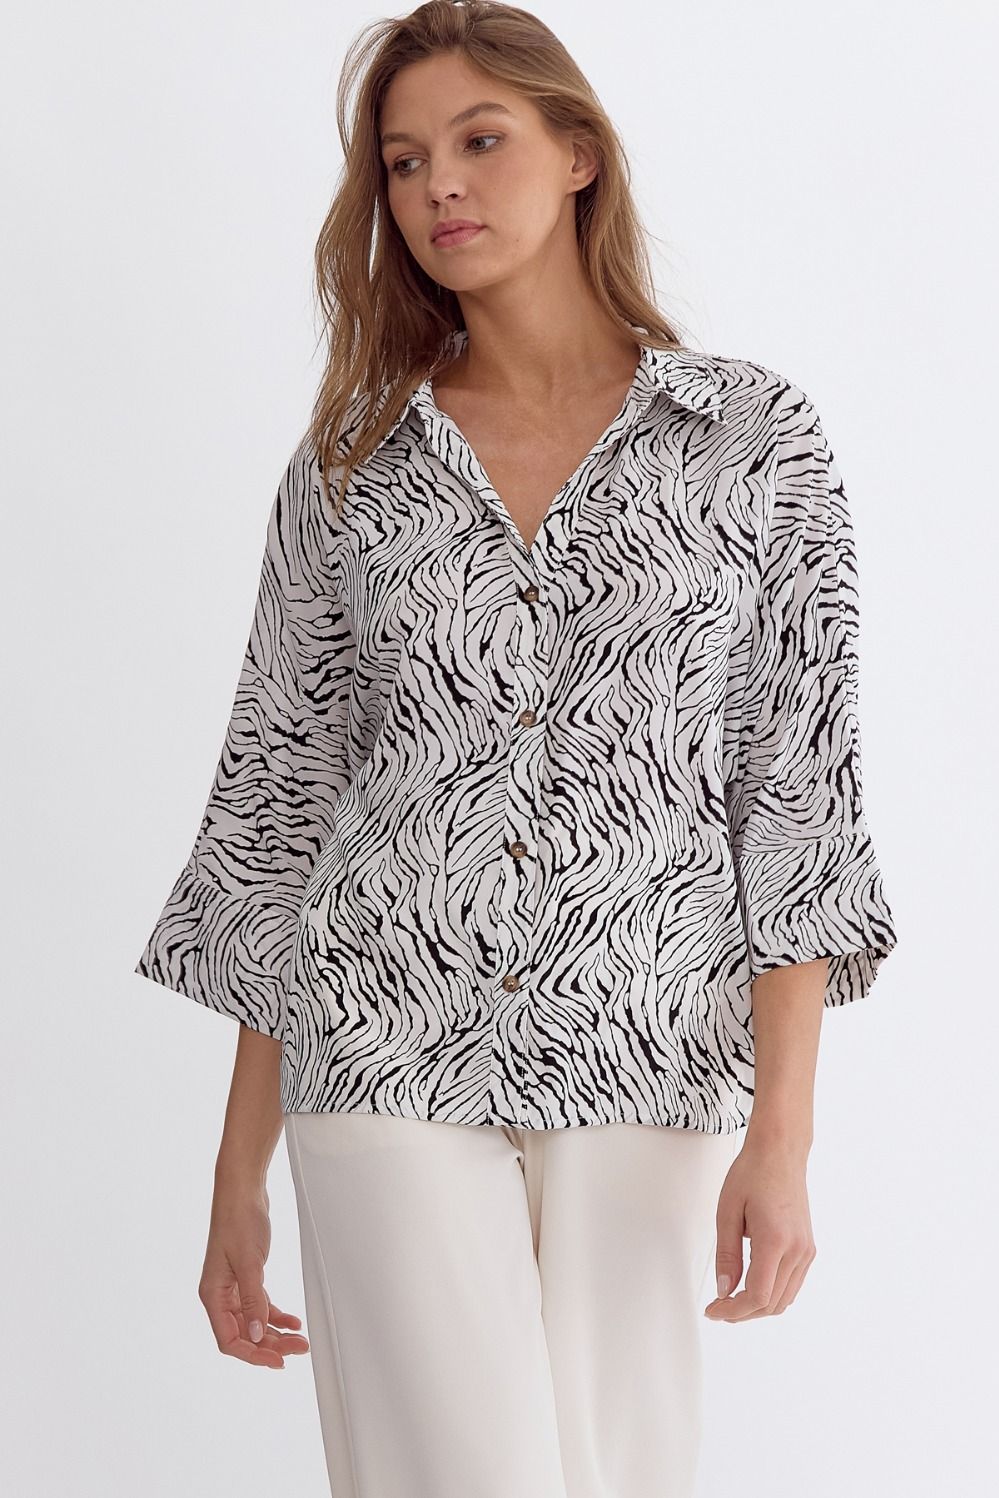 ENTRO INC Women's Top Printed 3/4 Sleeve Button Down Collared Top || David's Clothing